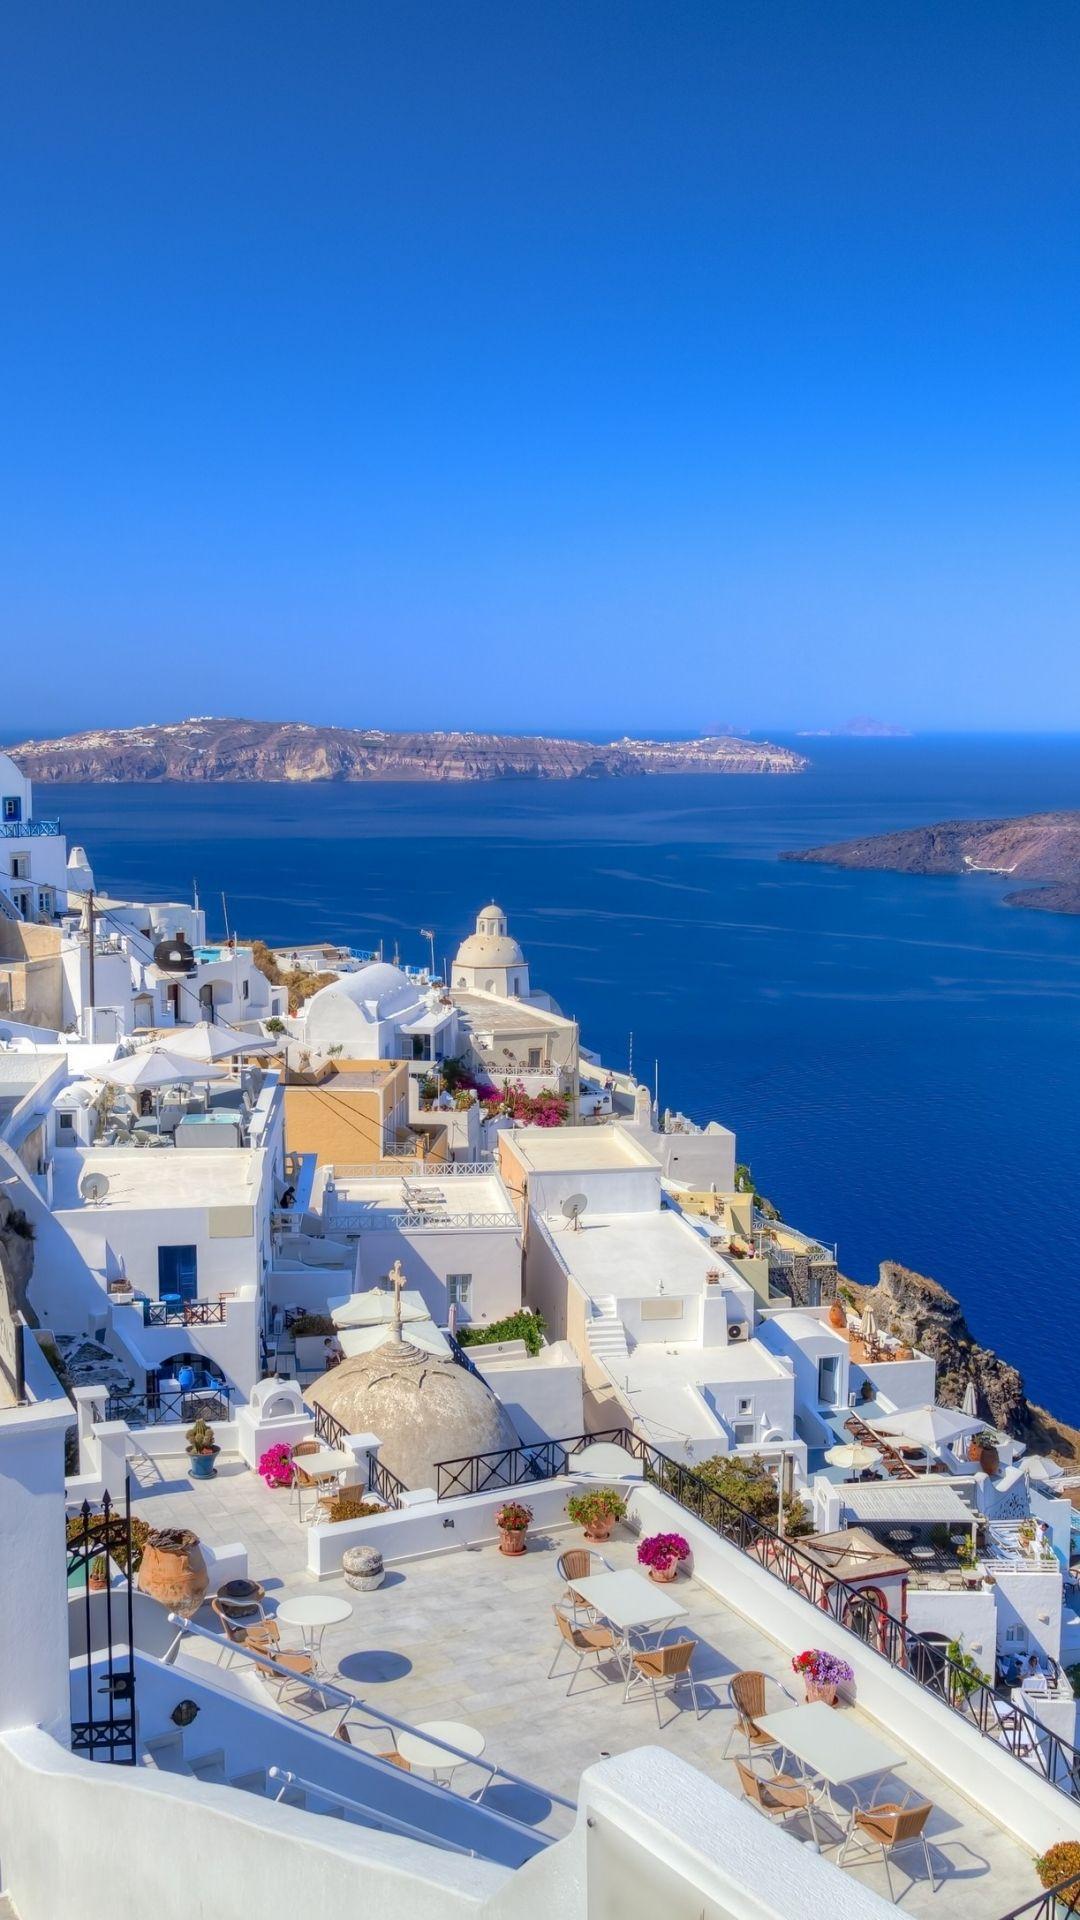 Santorini to see more #beautiful #landscape #cities